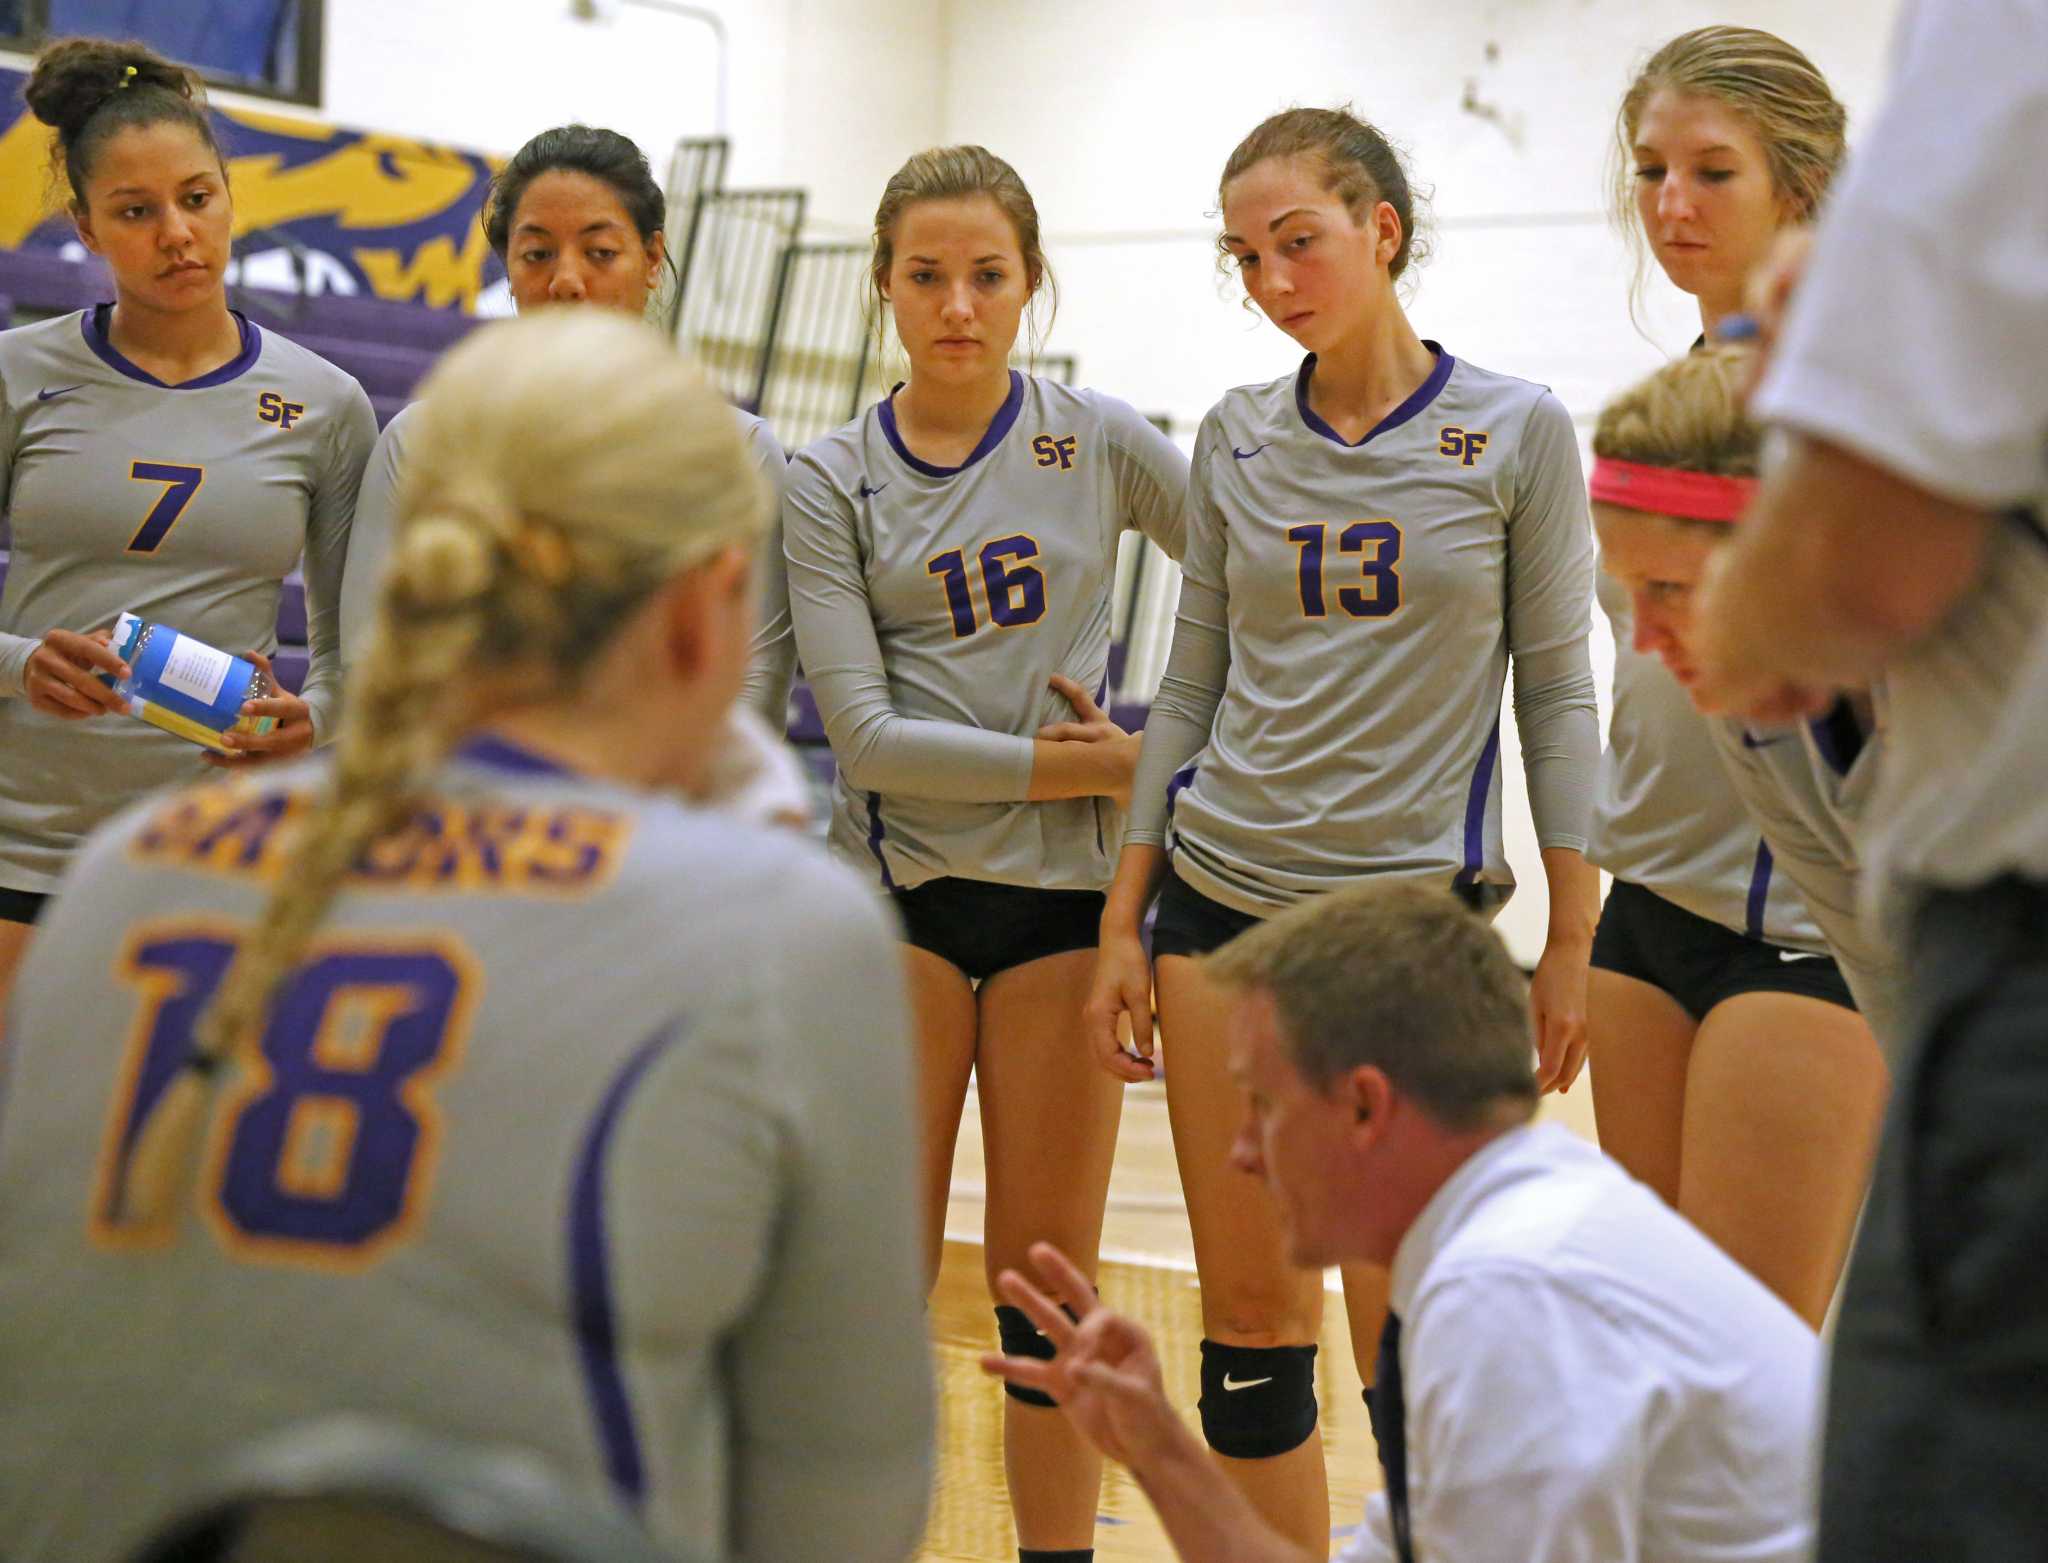 SF State Gators’ head coach Matt Hoffman talks with his team during their loss against Sonoma State University at the Swamp on Saturday, Sept. 17, 2016. The Gators fell to the Seawolves in three straight sets.